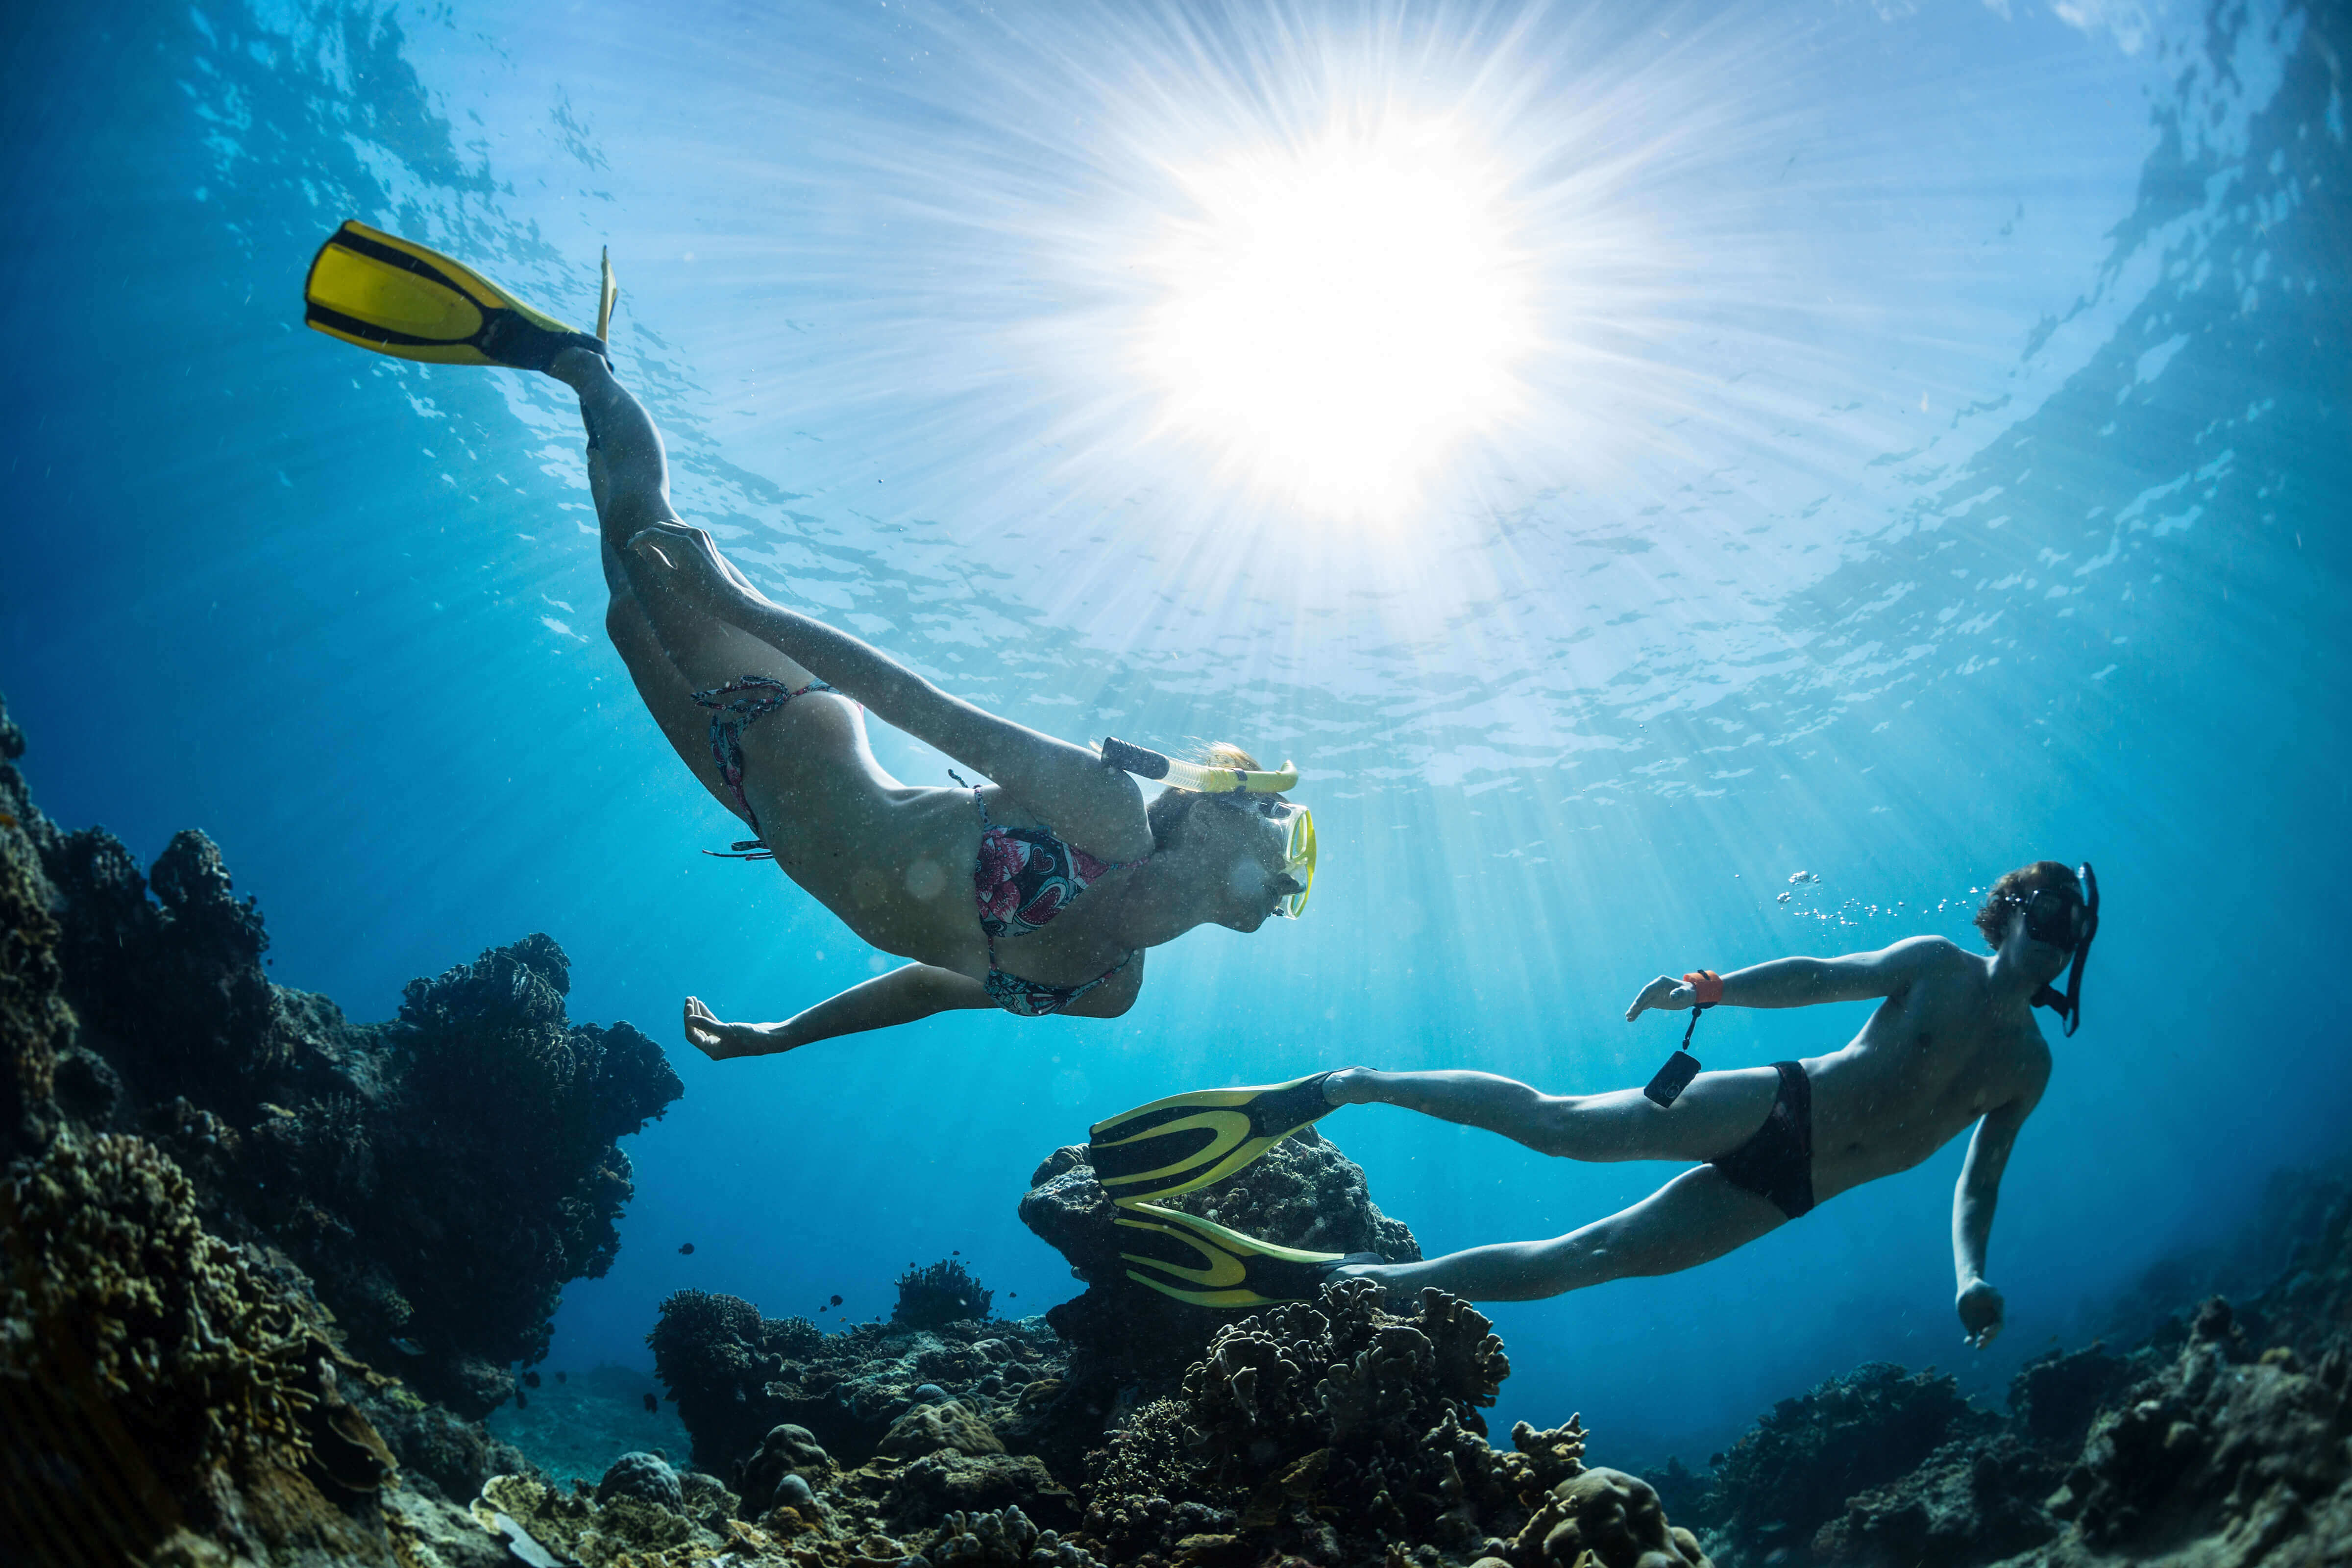 Snorkelling is one of the many activities available in Northern Cyprus